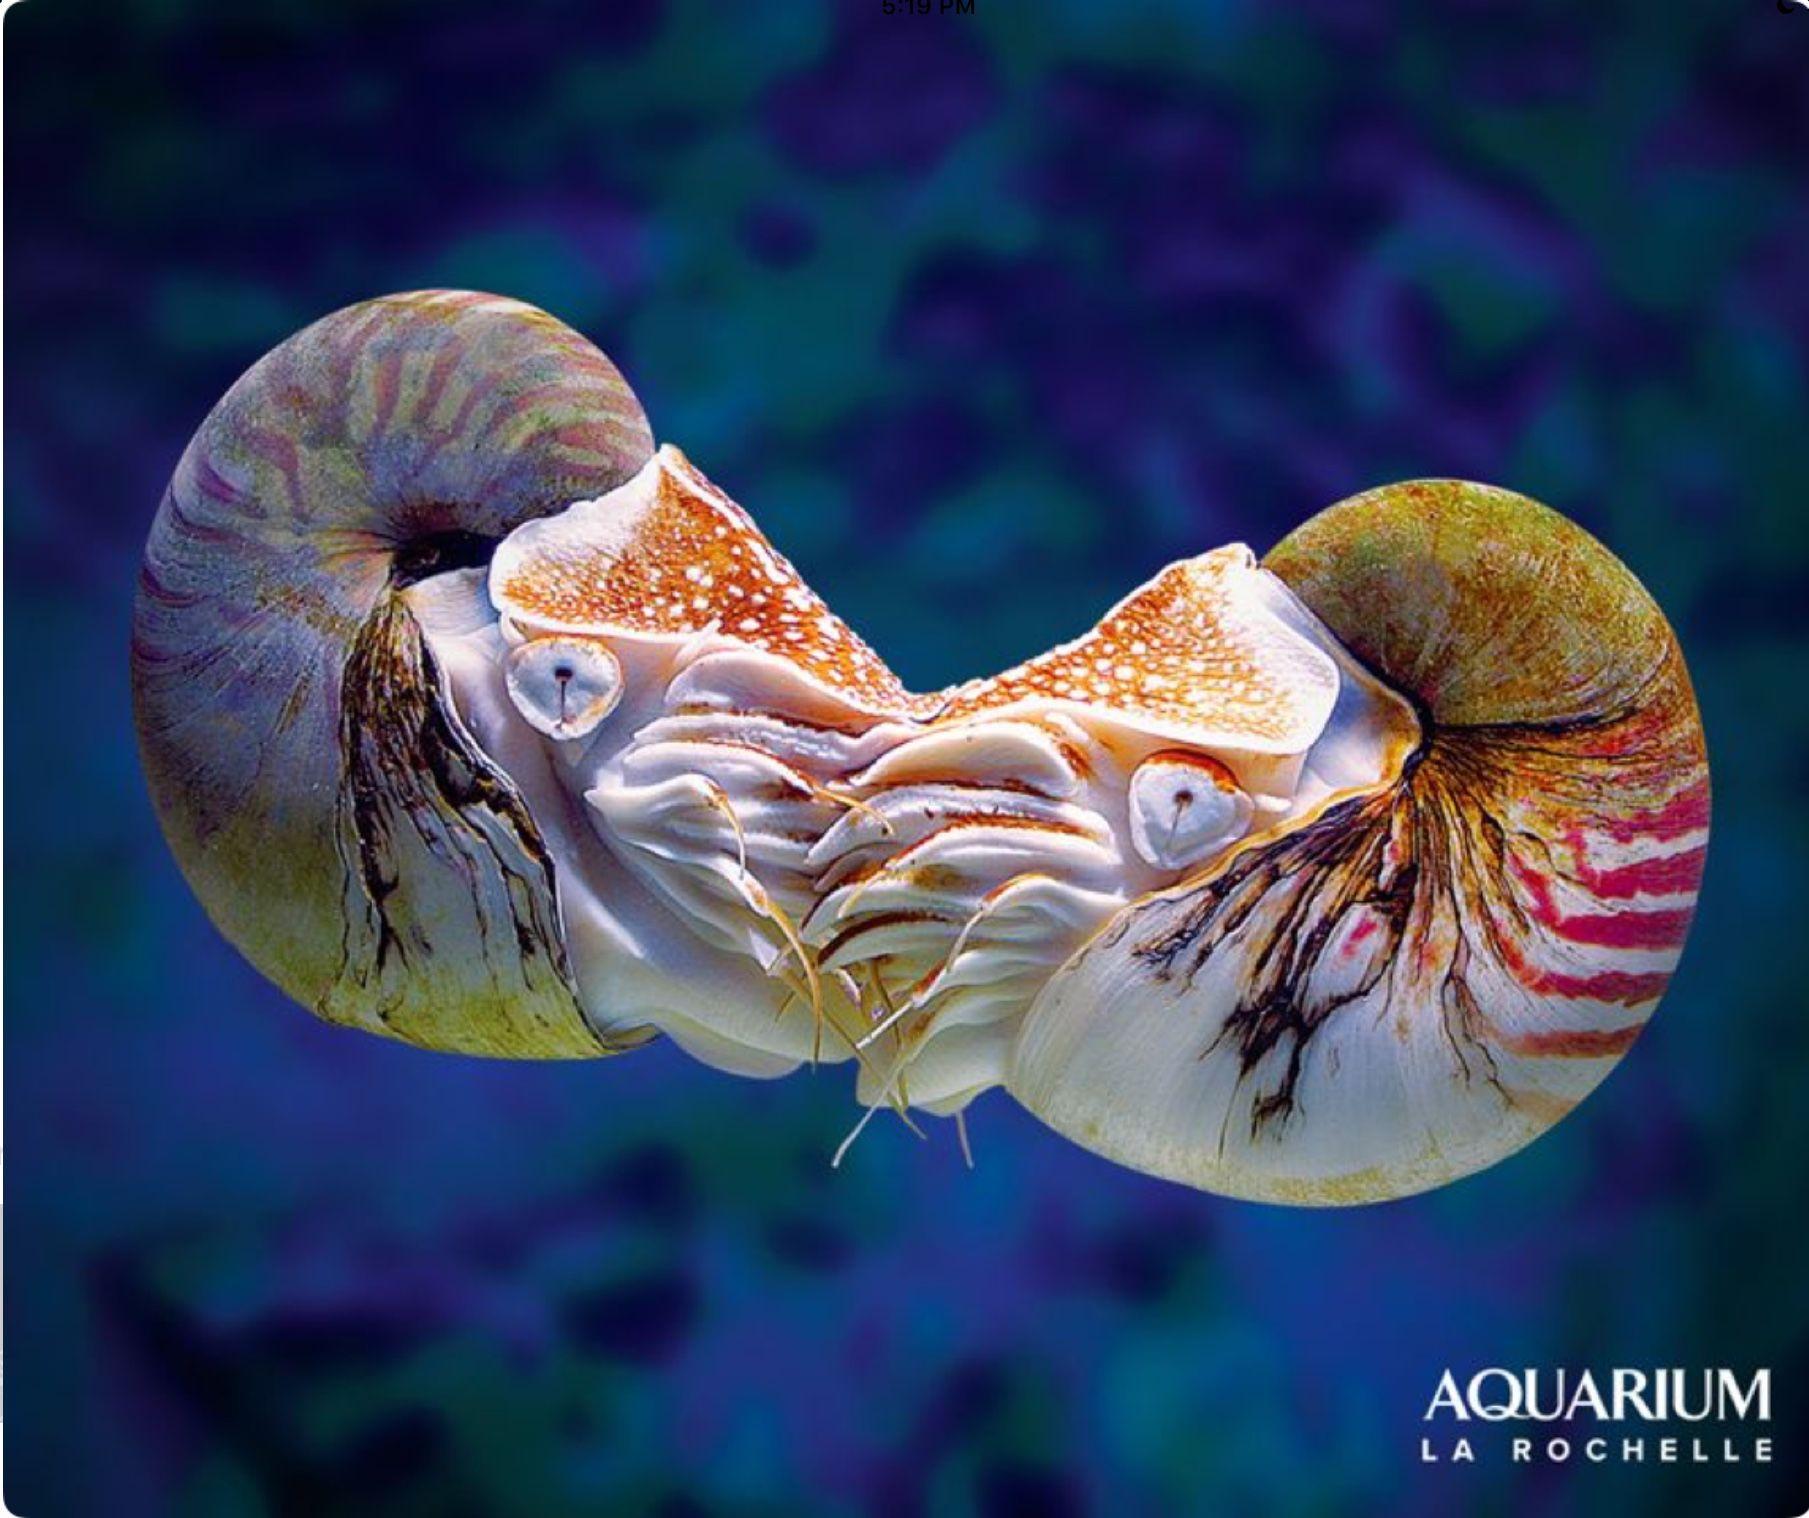 The beautiful and mysterious chambered nautilus is a living